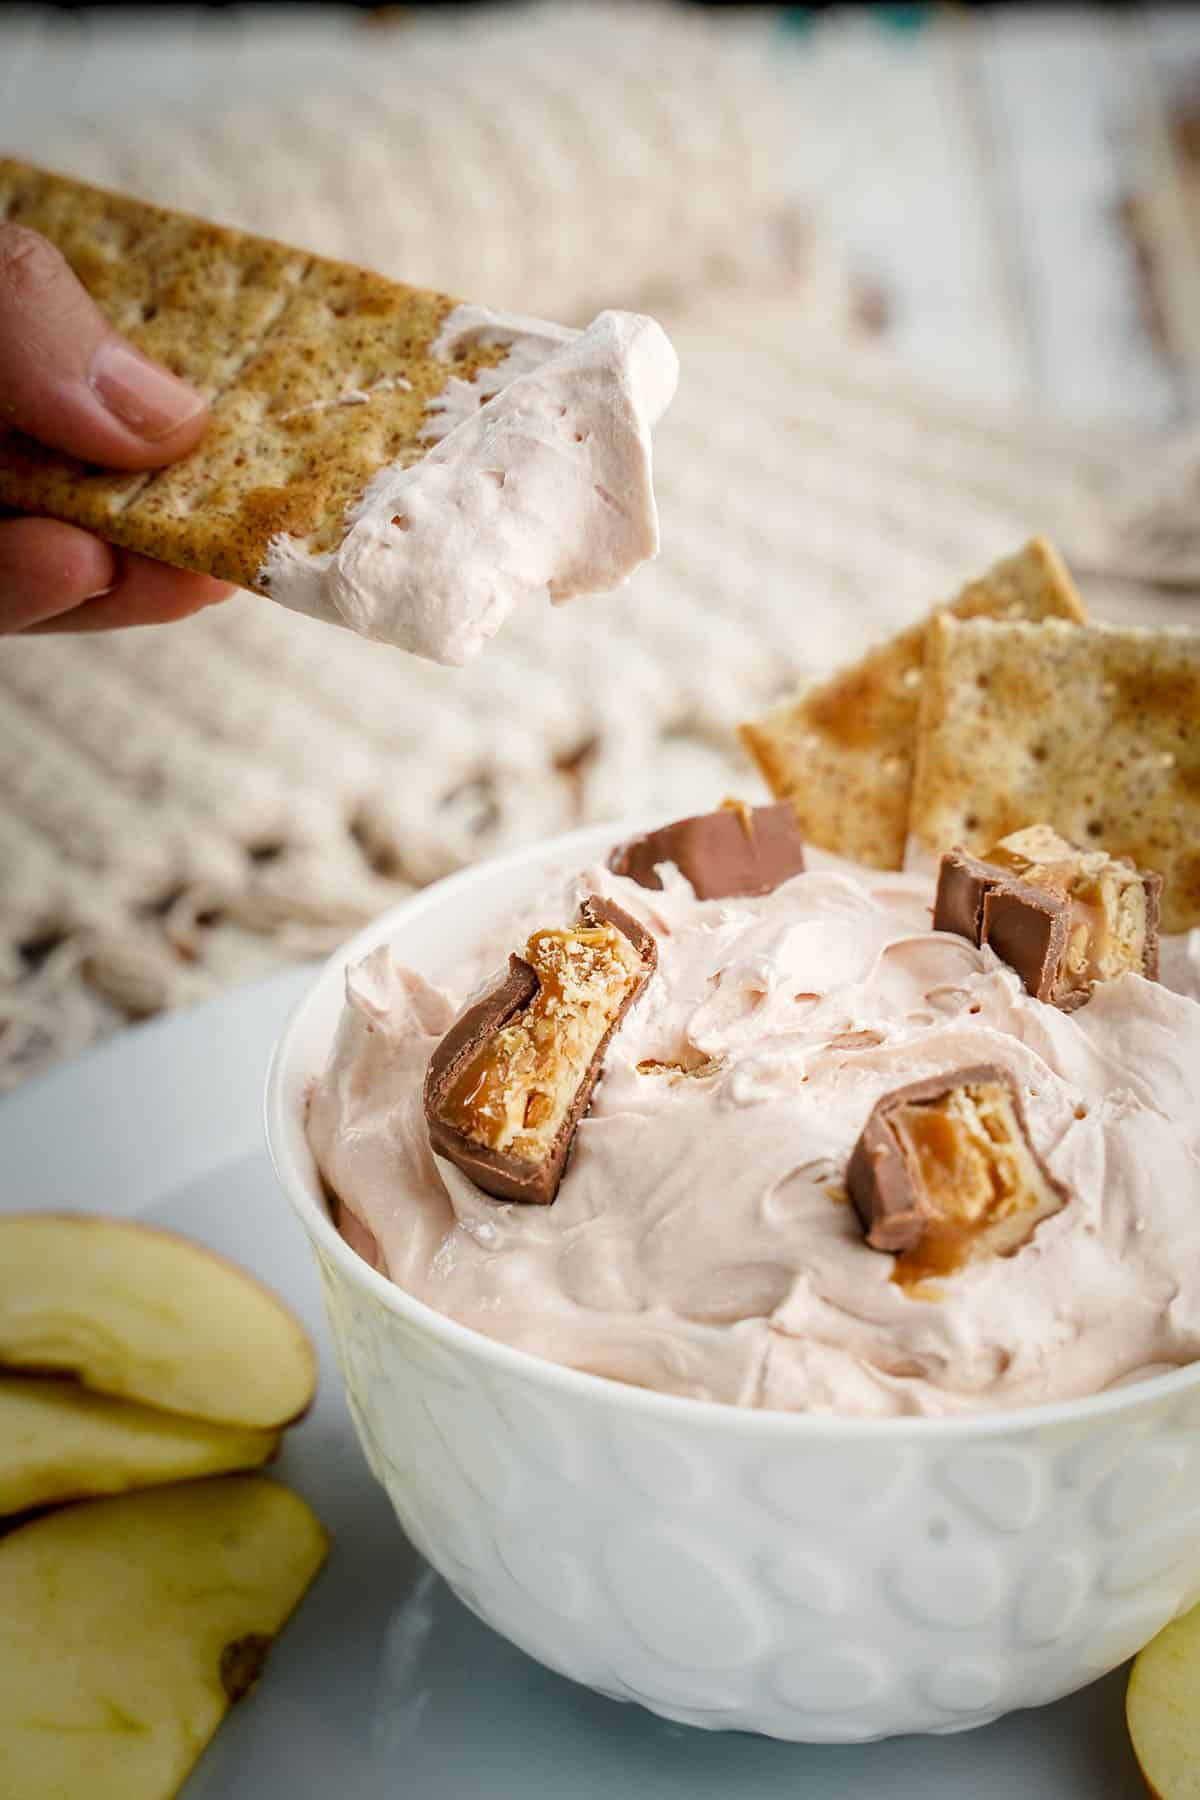 Snickers dip in a bowl on a table